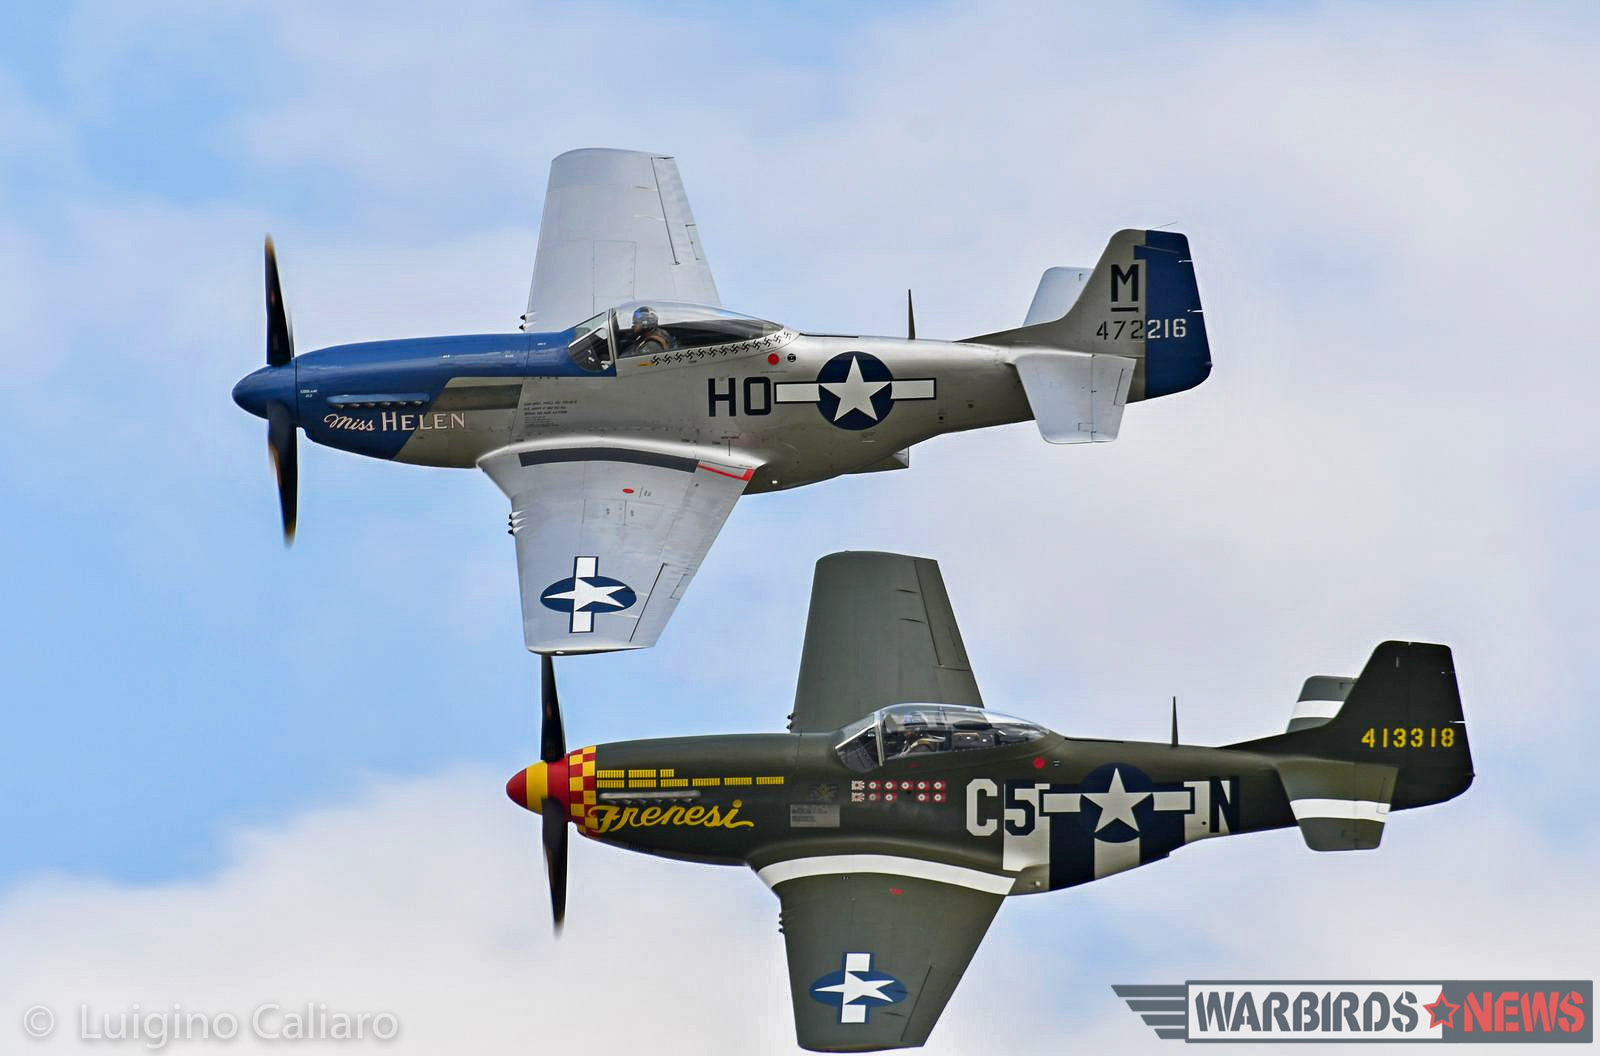 A magnificent closeup showing two of the many Mustangs at the show in tight formation. (photo by Luigino Caliaro)